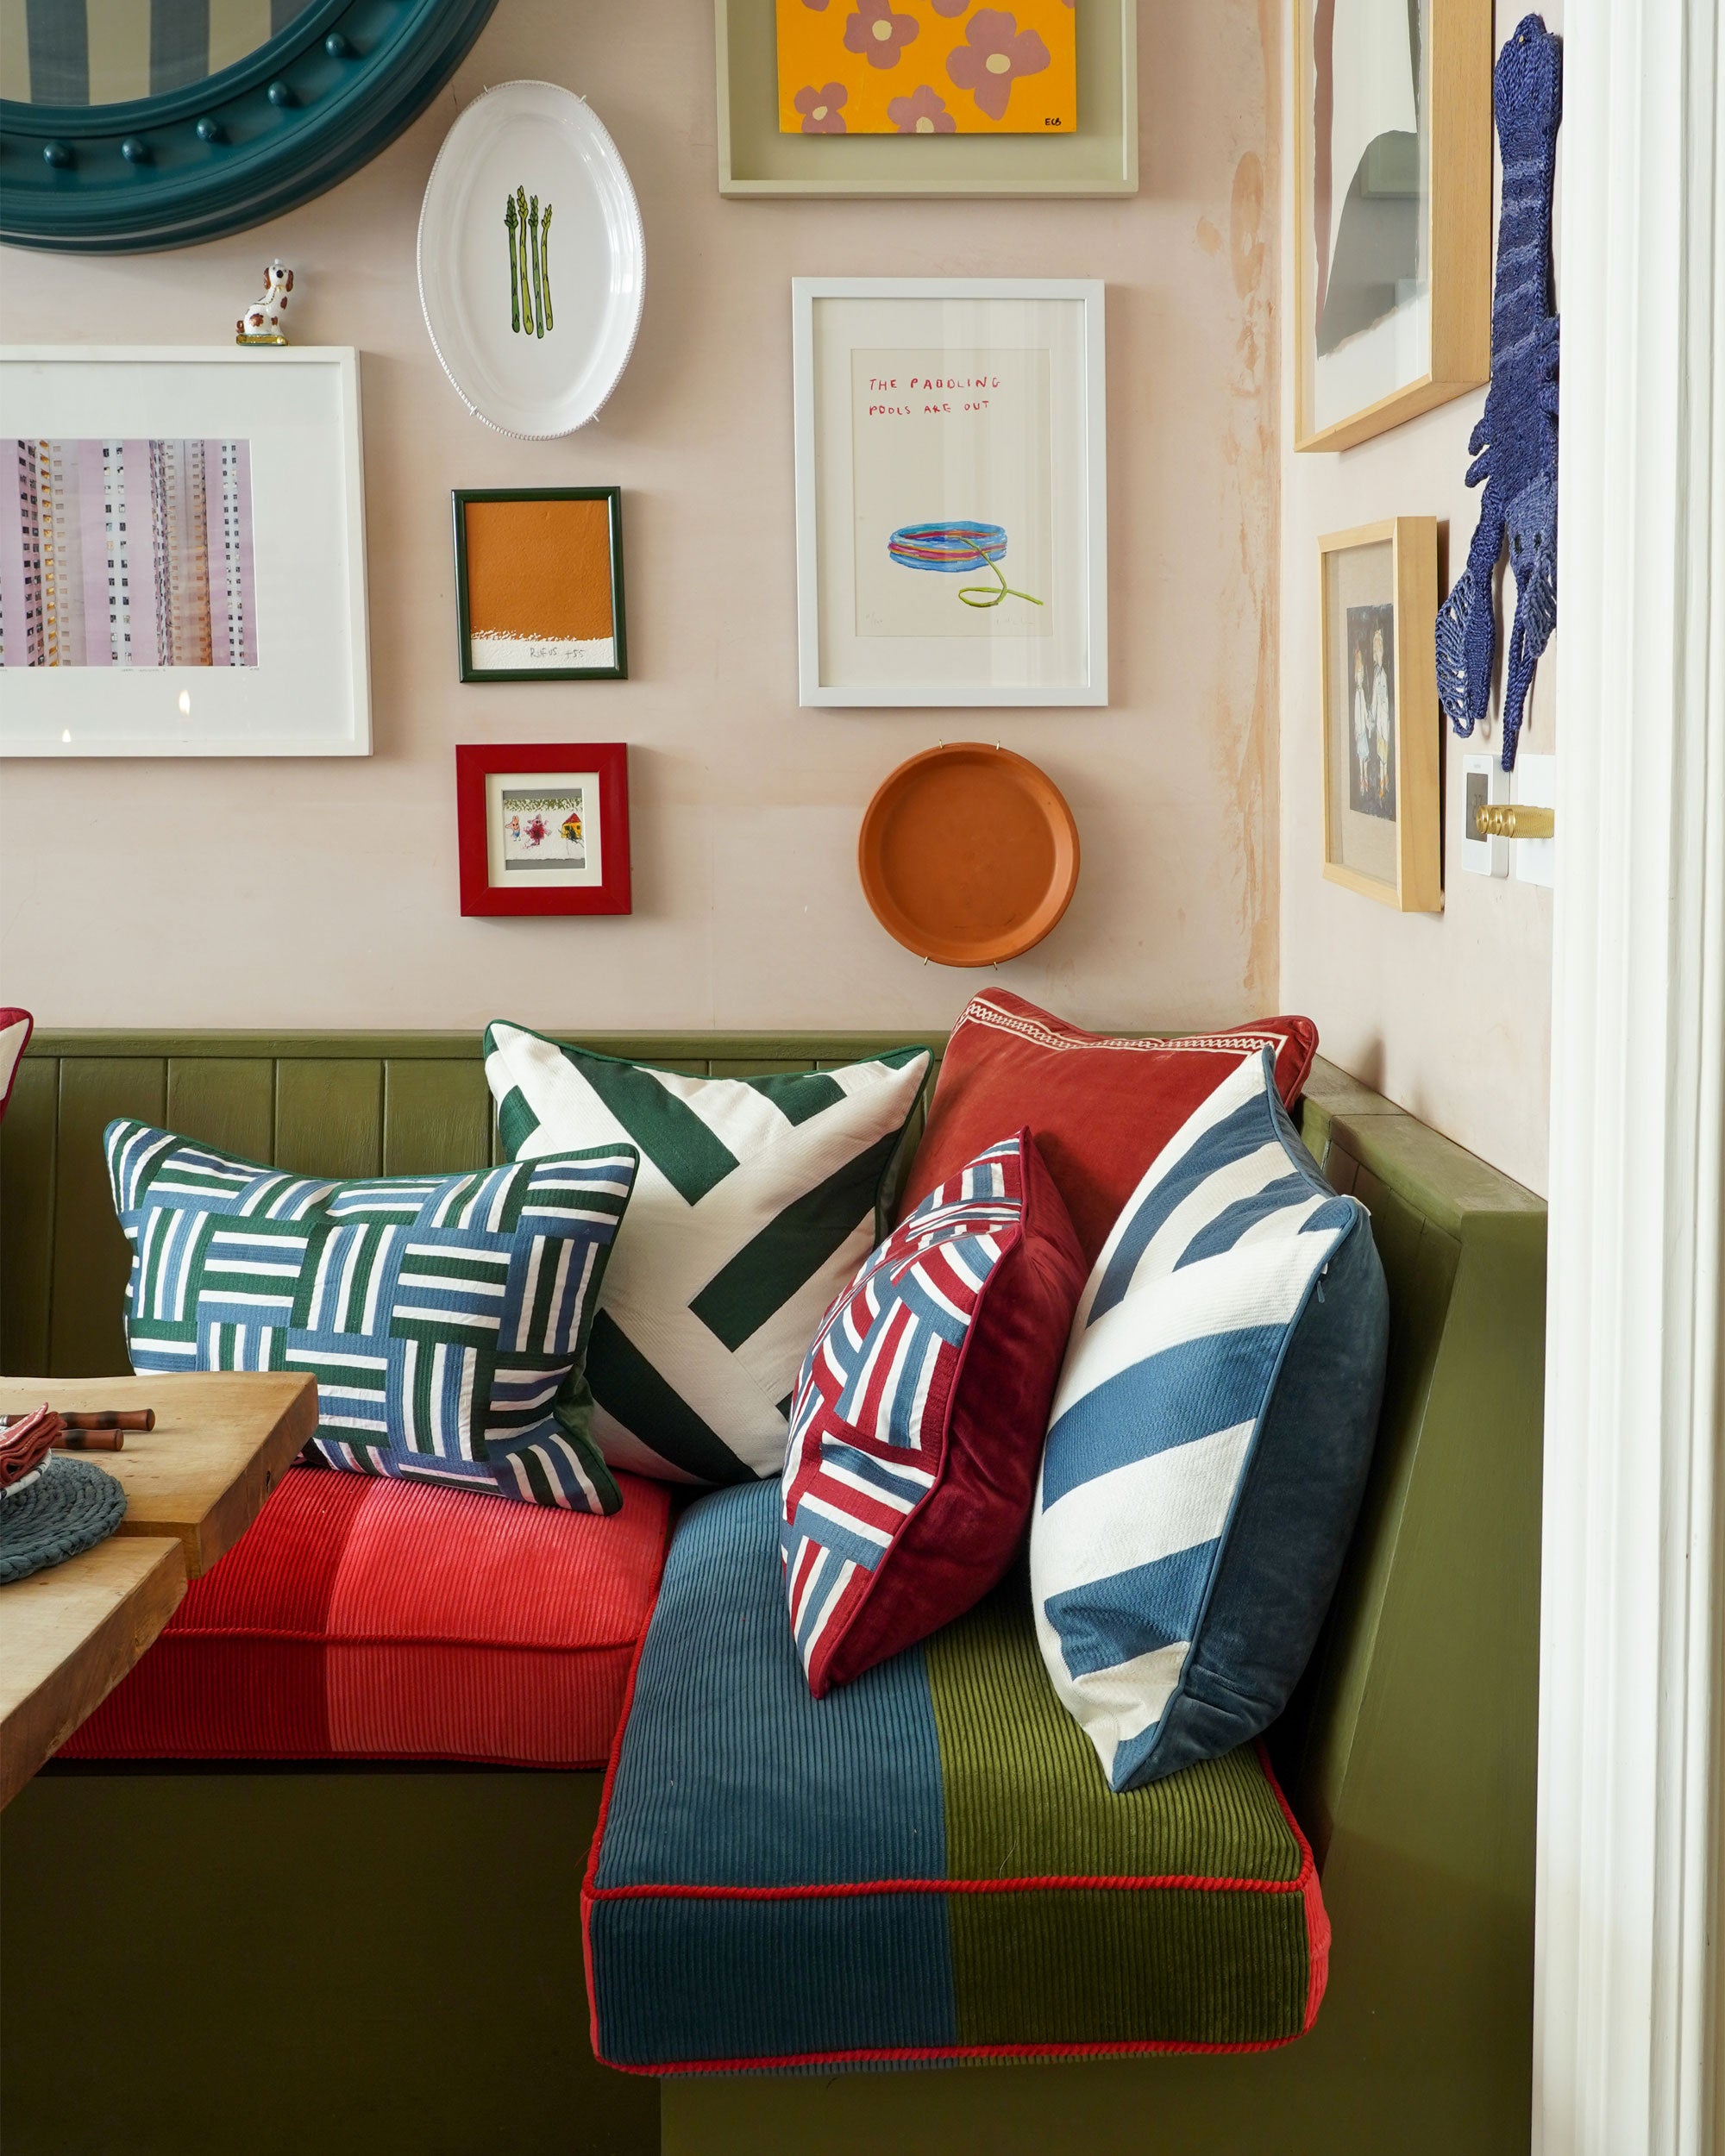 The Embroidered Stripey Cushion - The Blue and Red